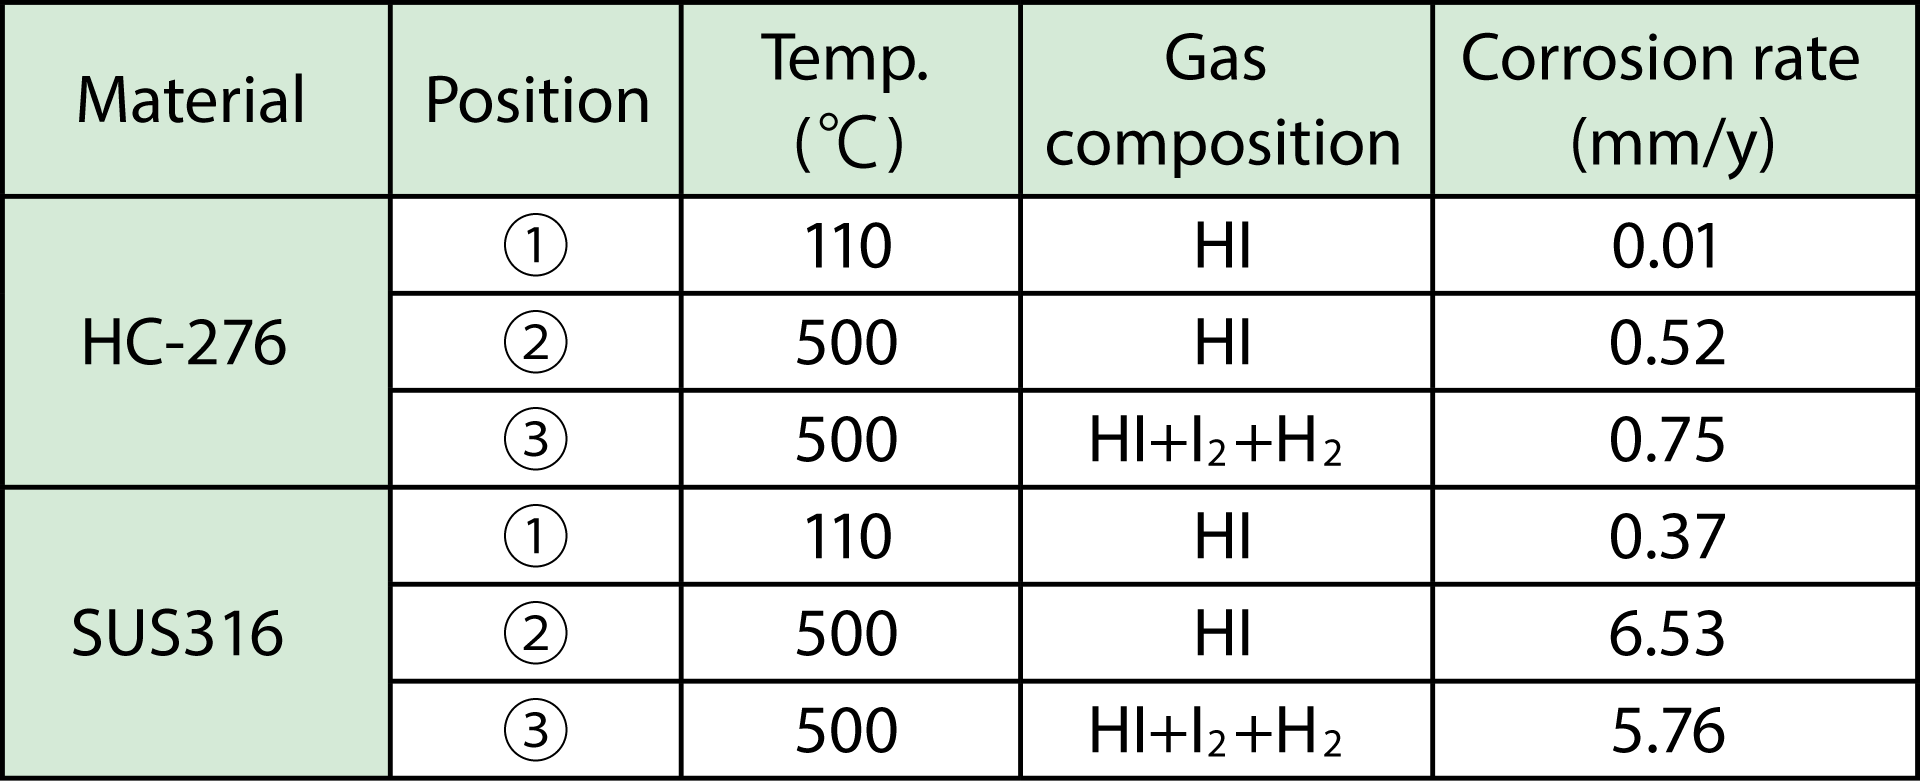 Table 6-3  Corrosion rates of test specimens